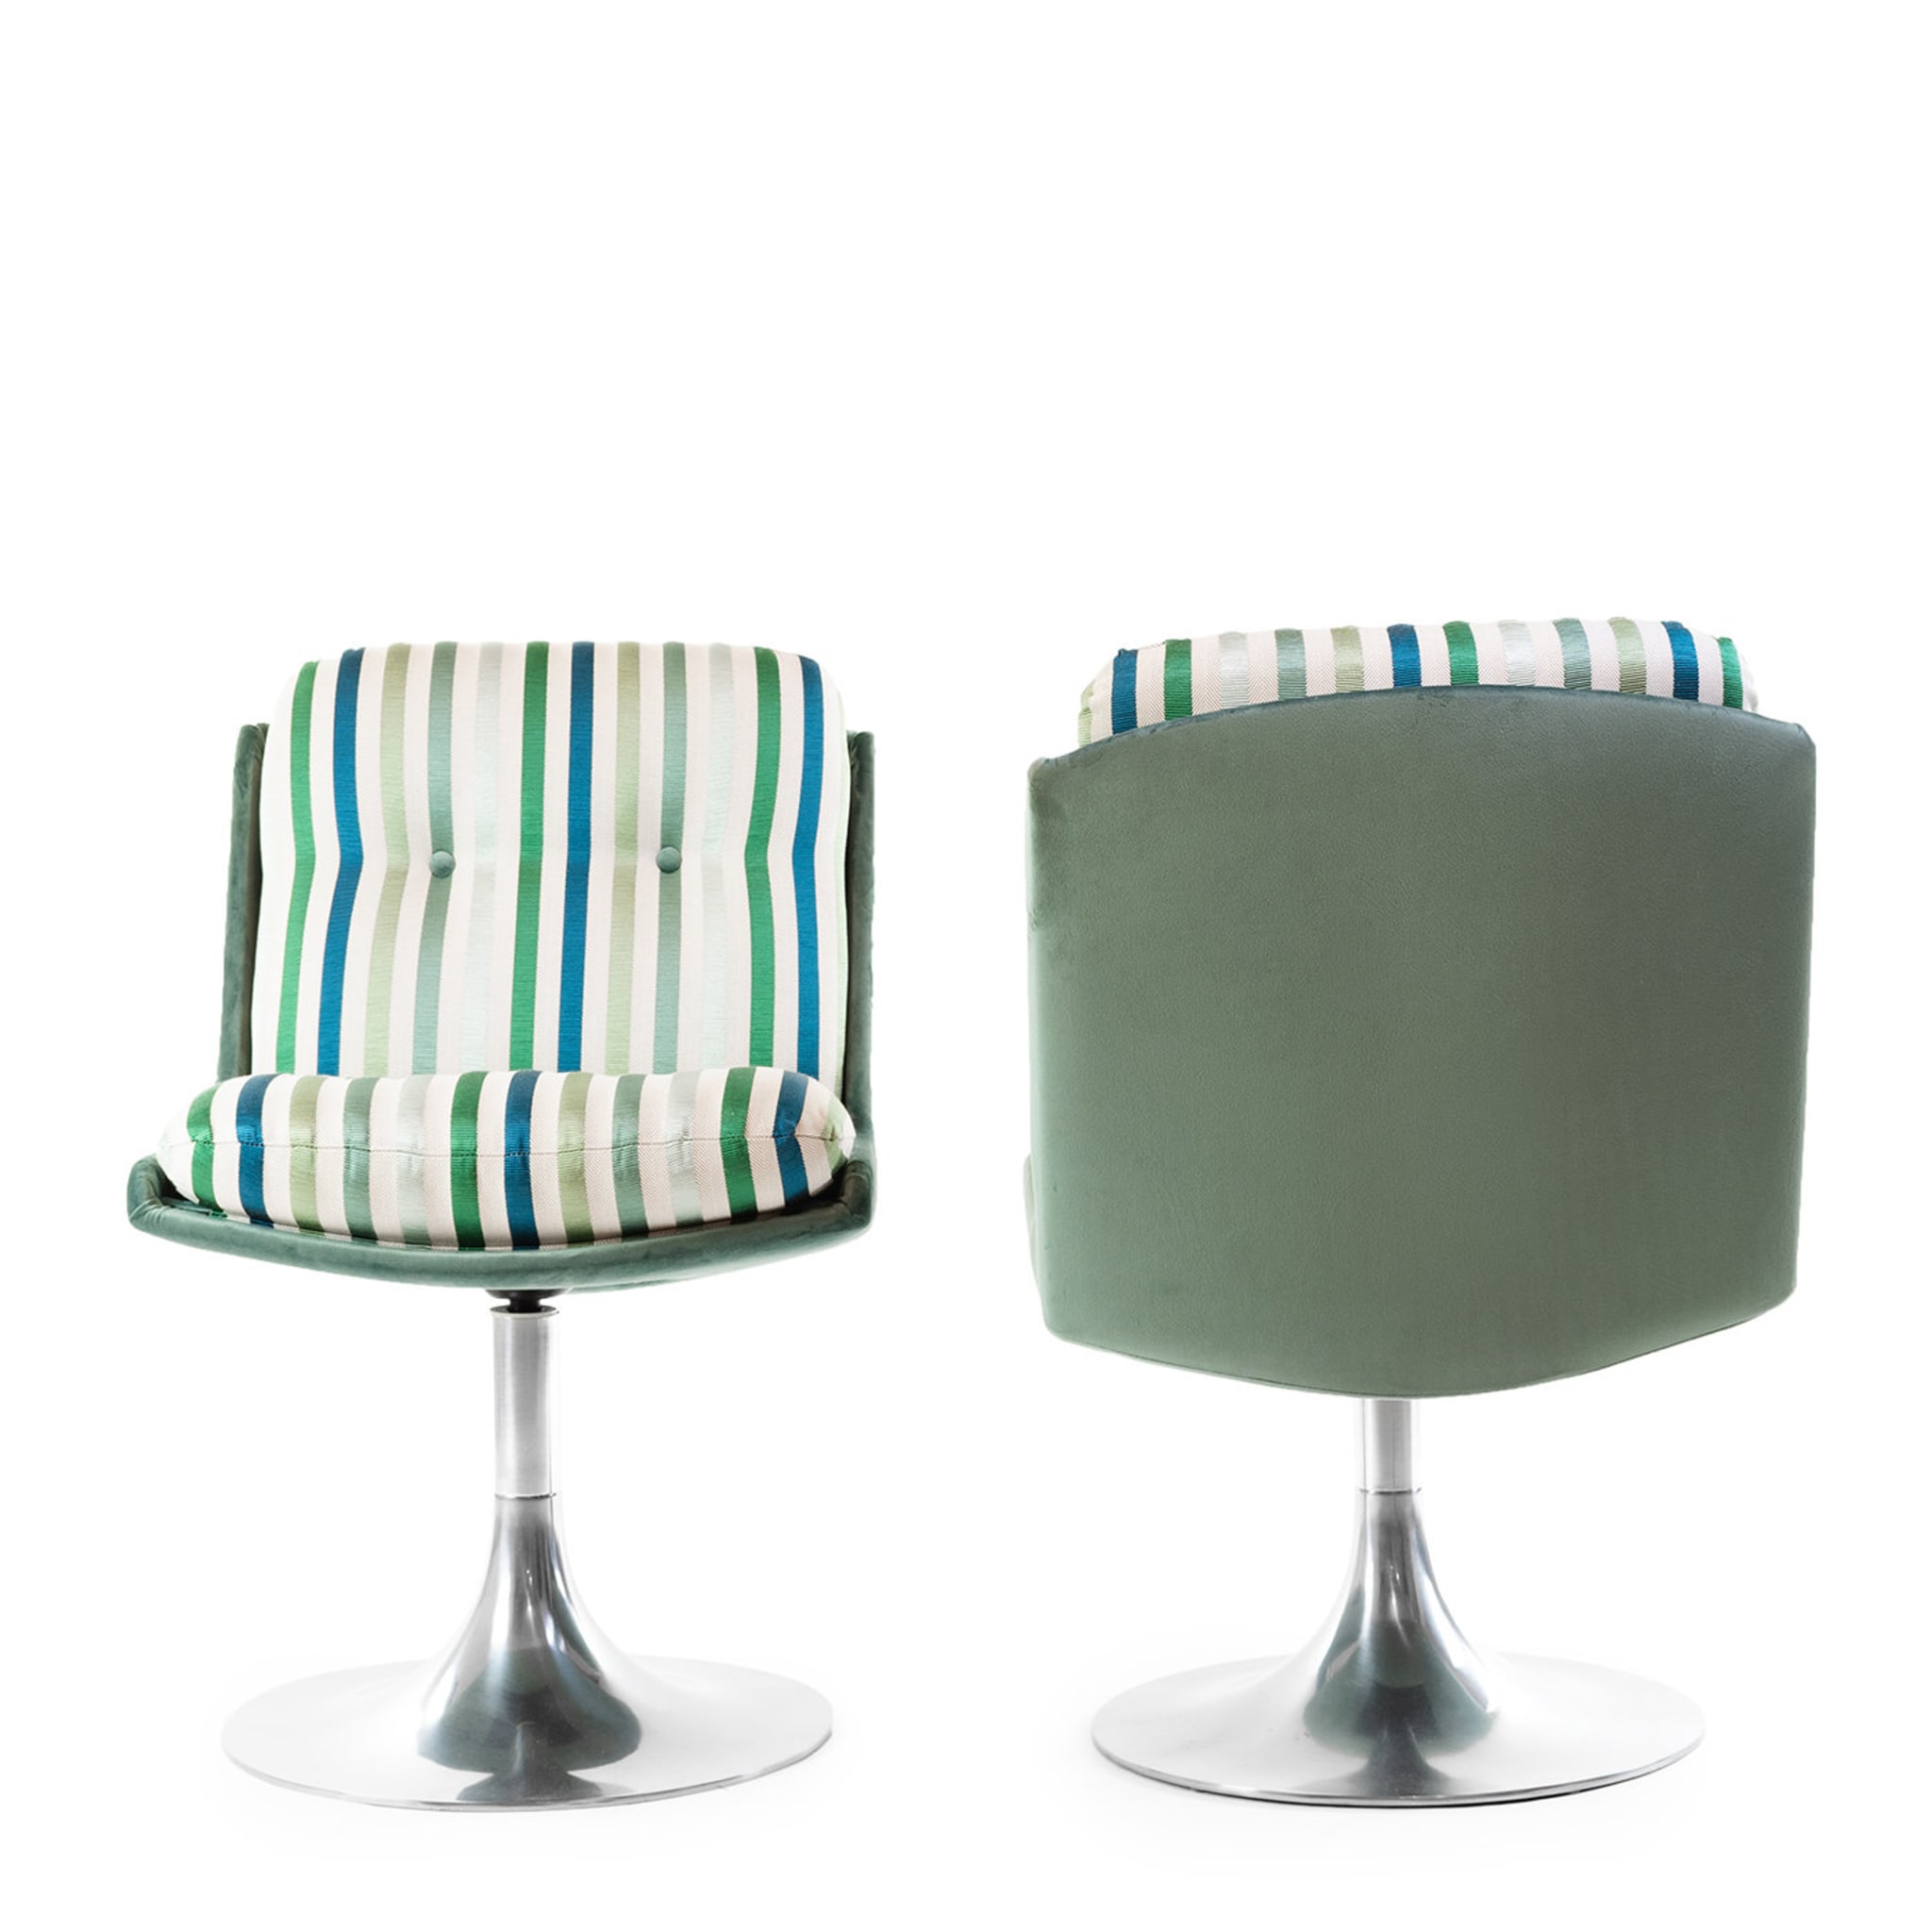 Trophies Set of 2 Pedestal Chairs  - Alternative view 1